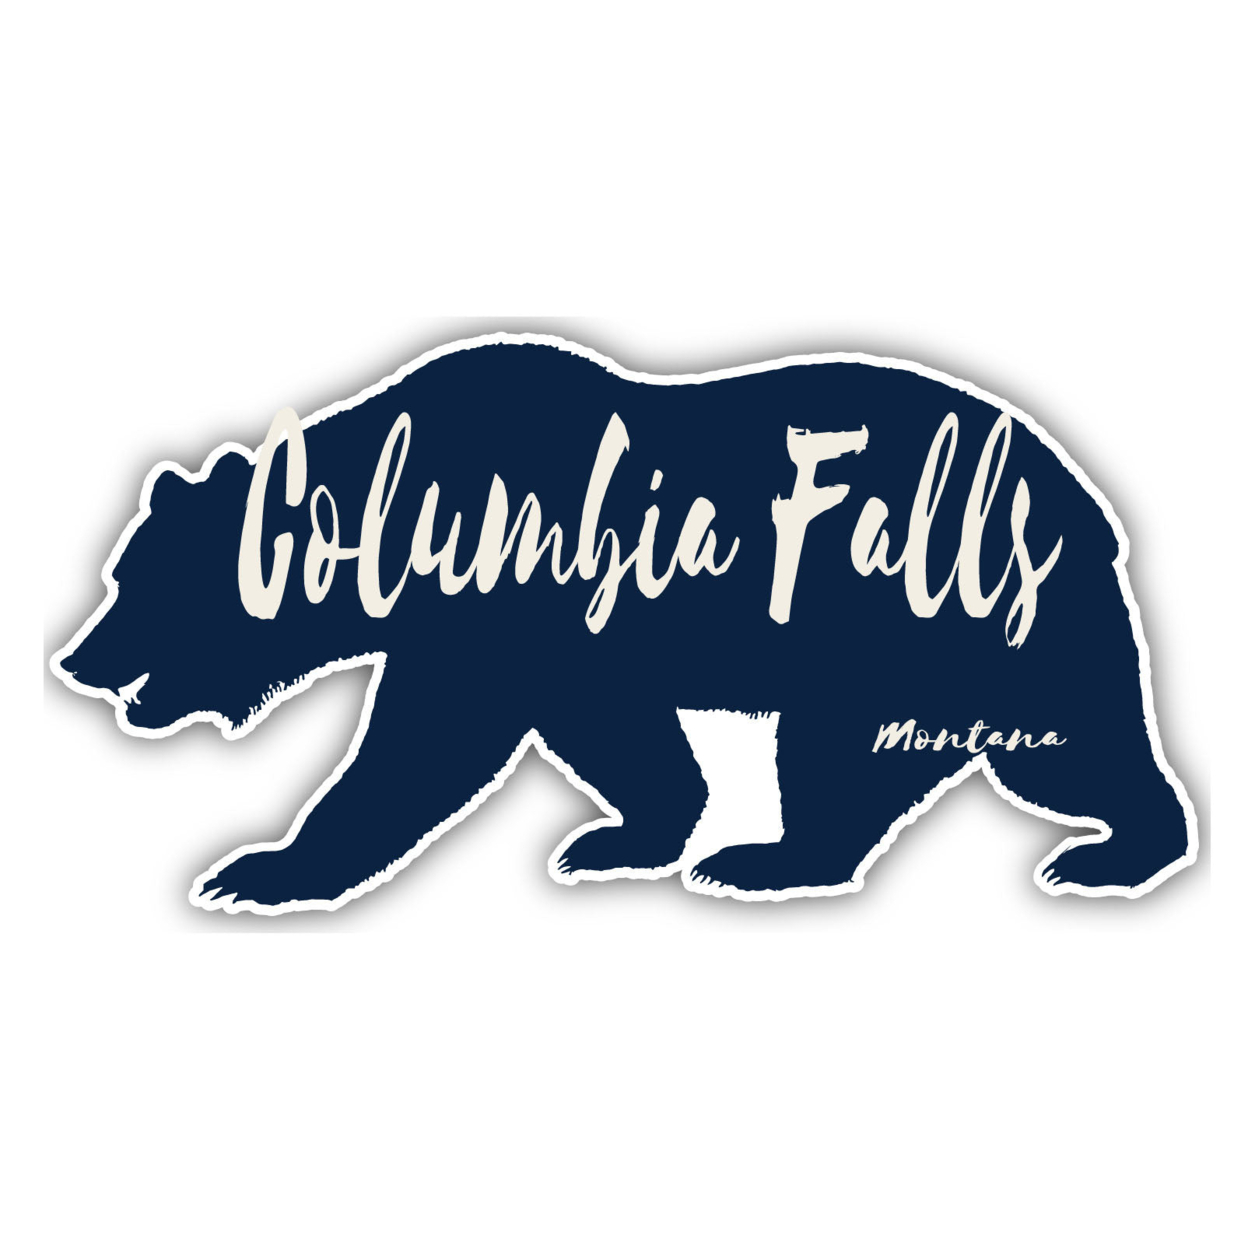 Columbia Falls Montana Souvenir Decorative Stickers (Choose Theme And Size) - 4-Pack, 2-Inch, Bear